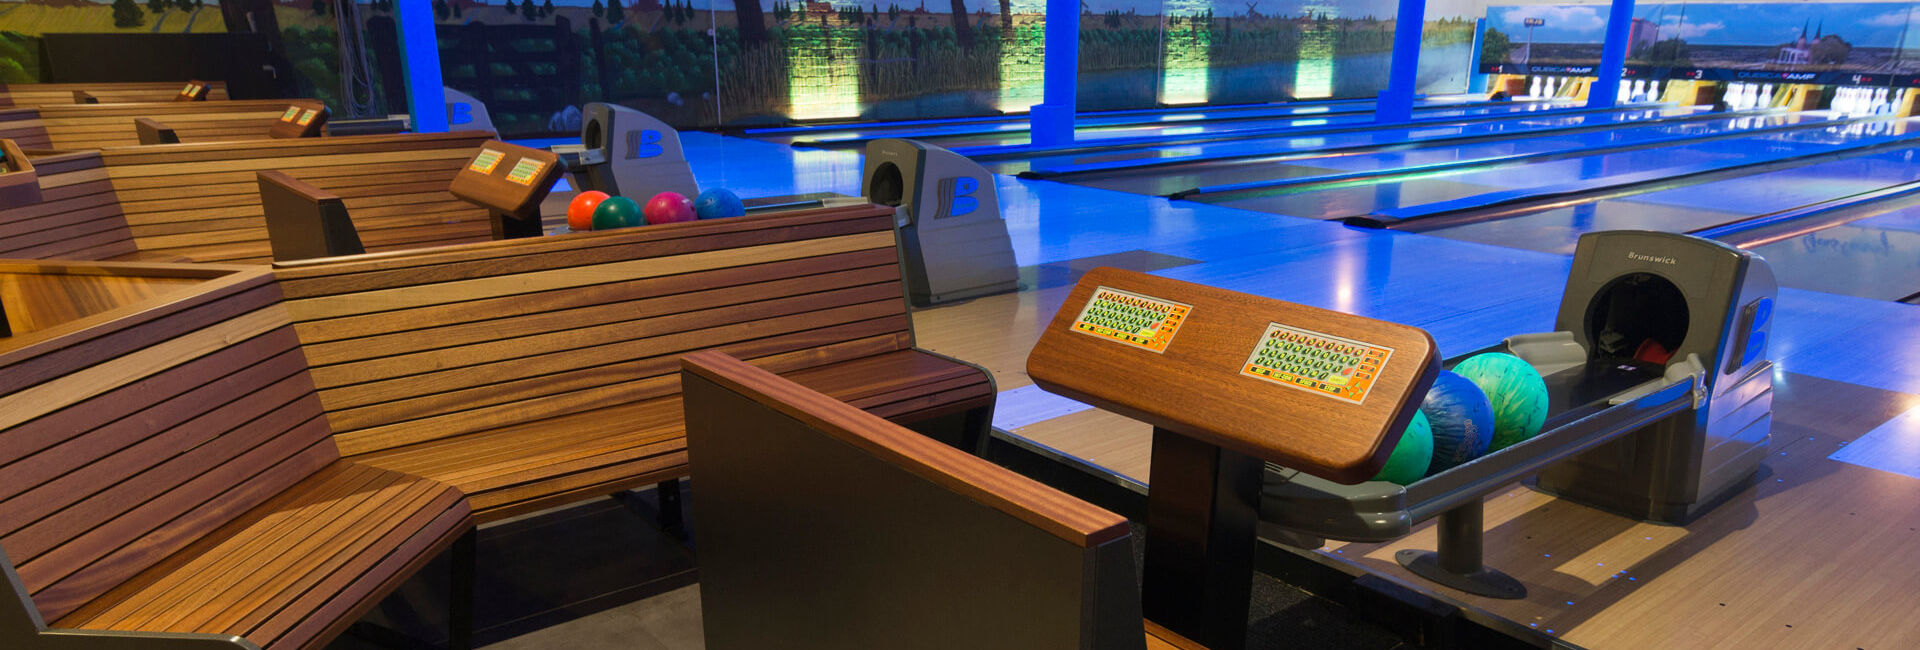 Bowling lanes and seats - About us - Gasterij 't Karrewiel